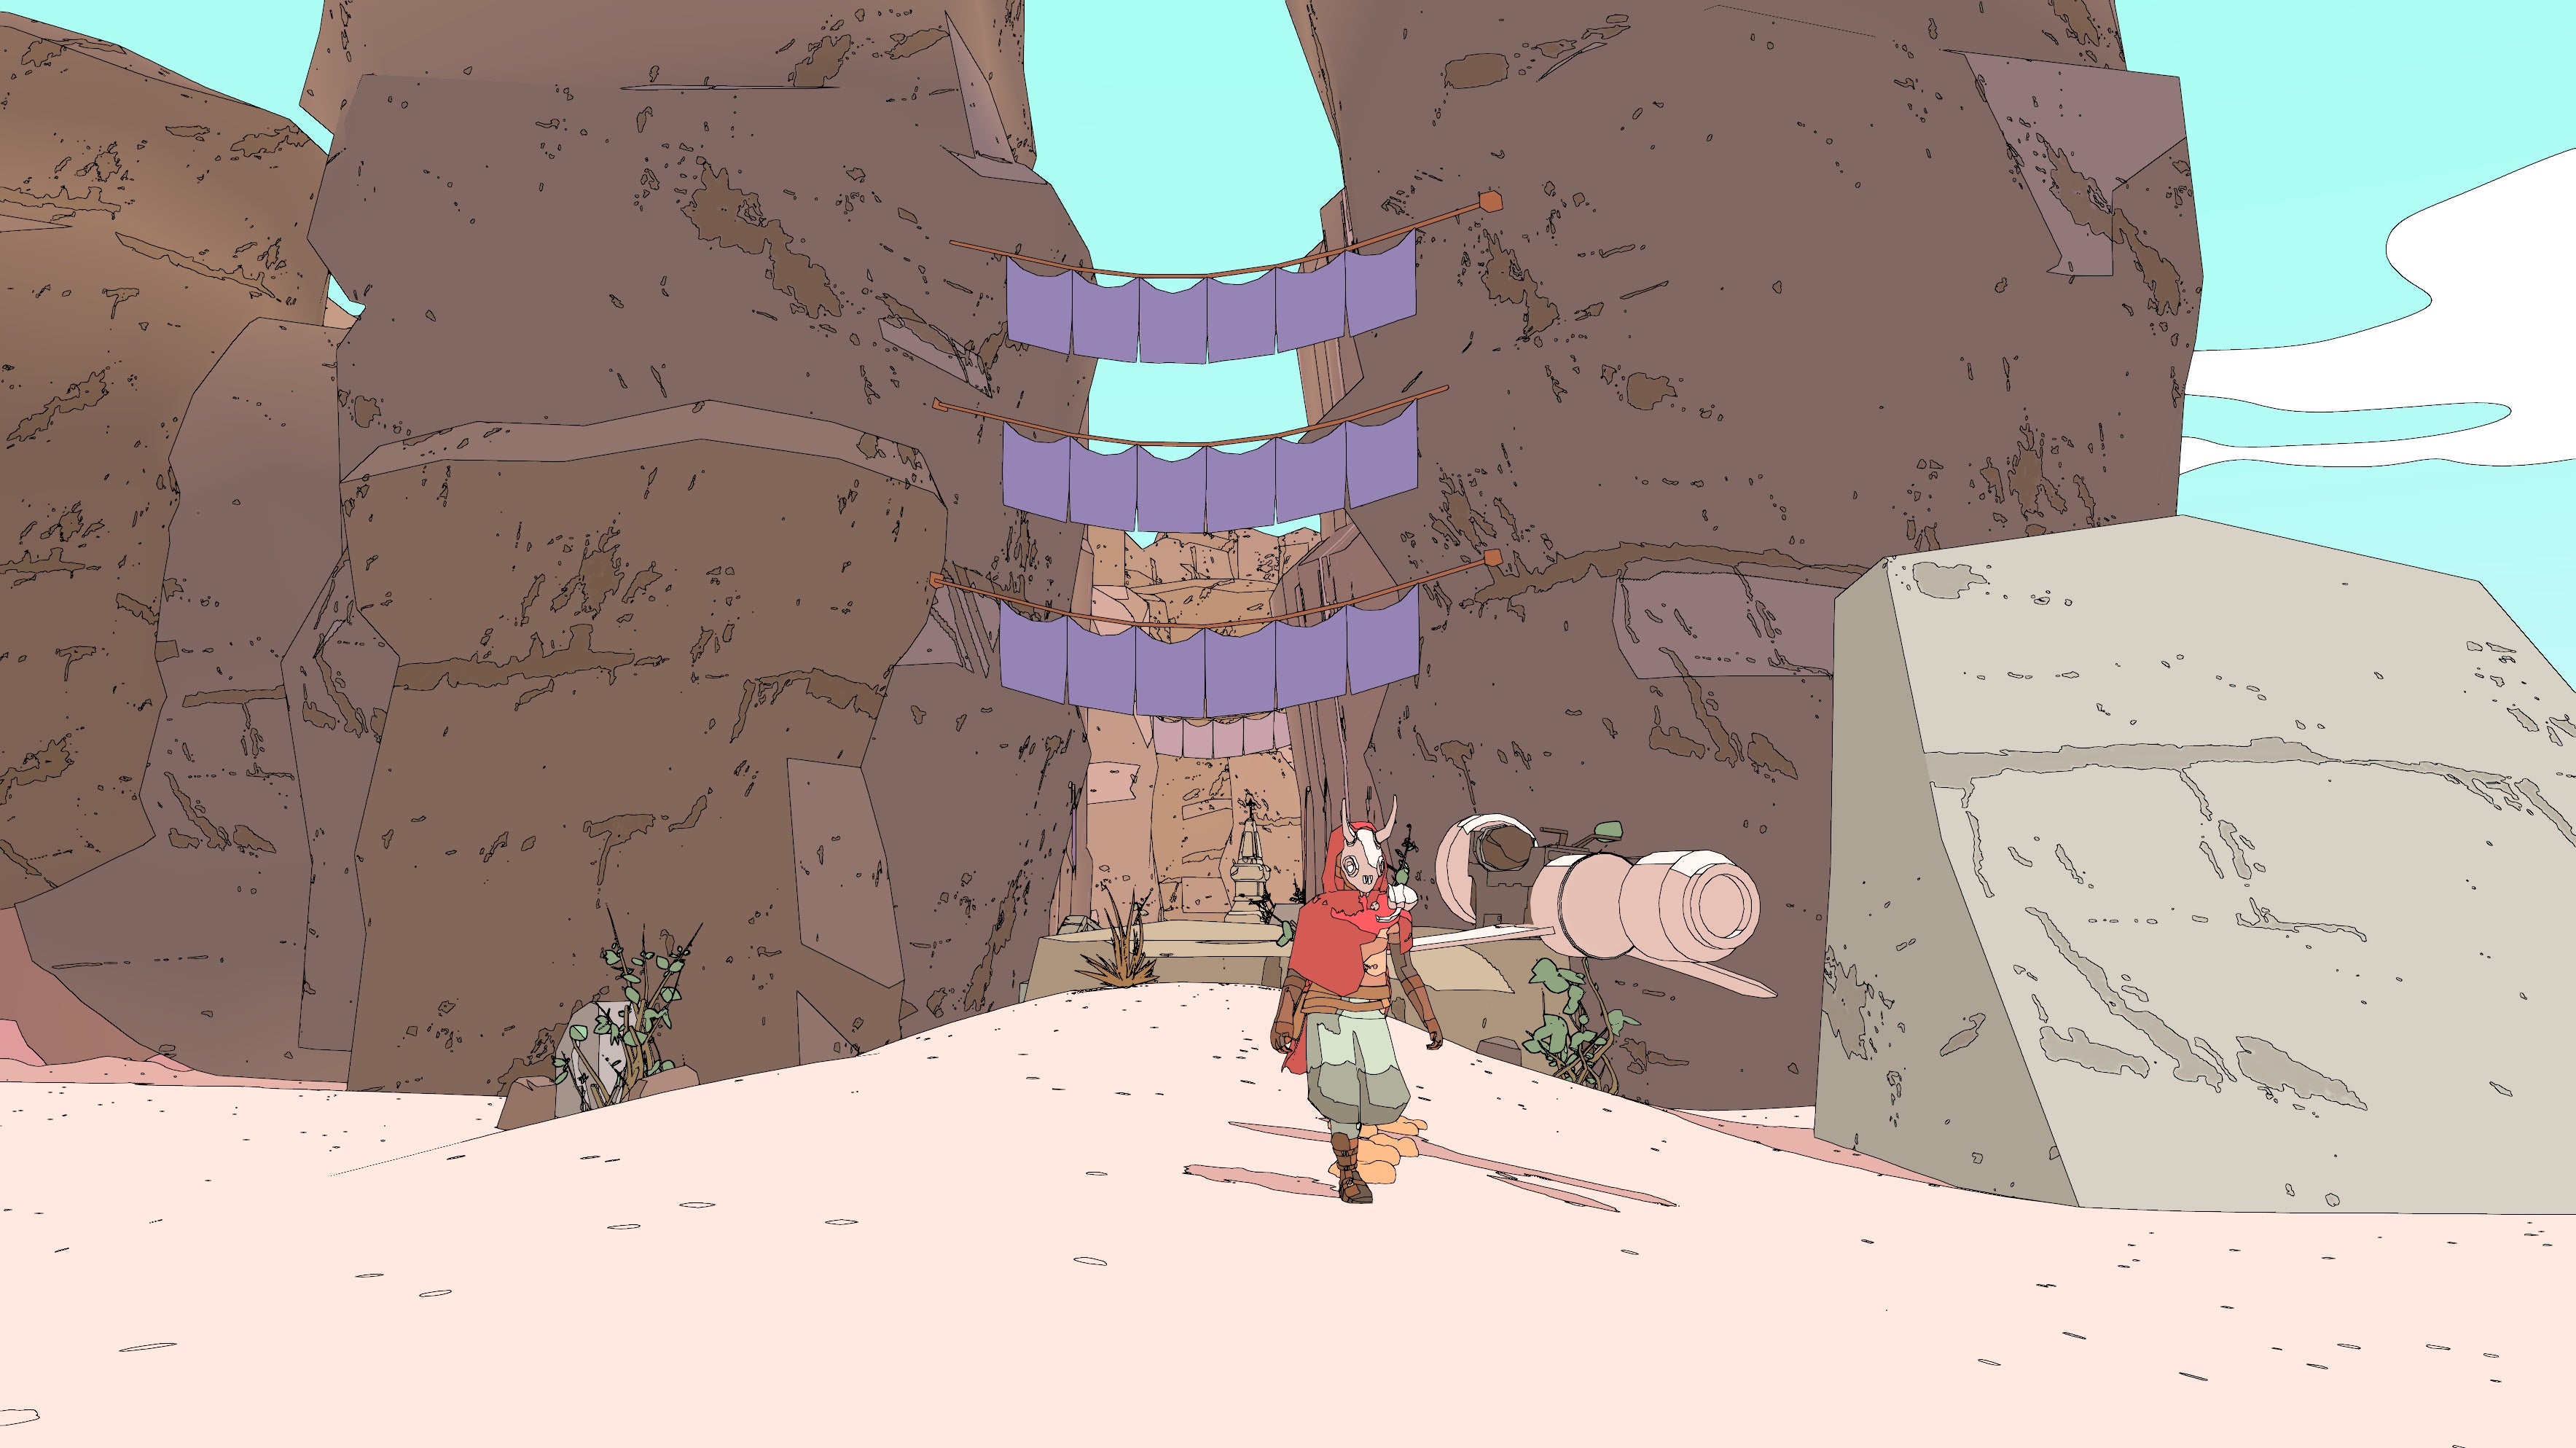 Sable walks through a pretty canyon next to her hoverbike.